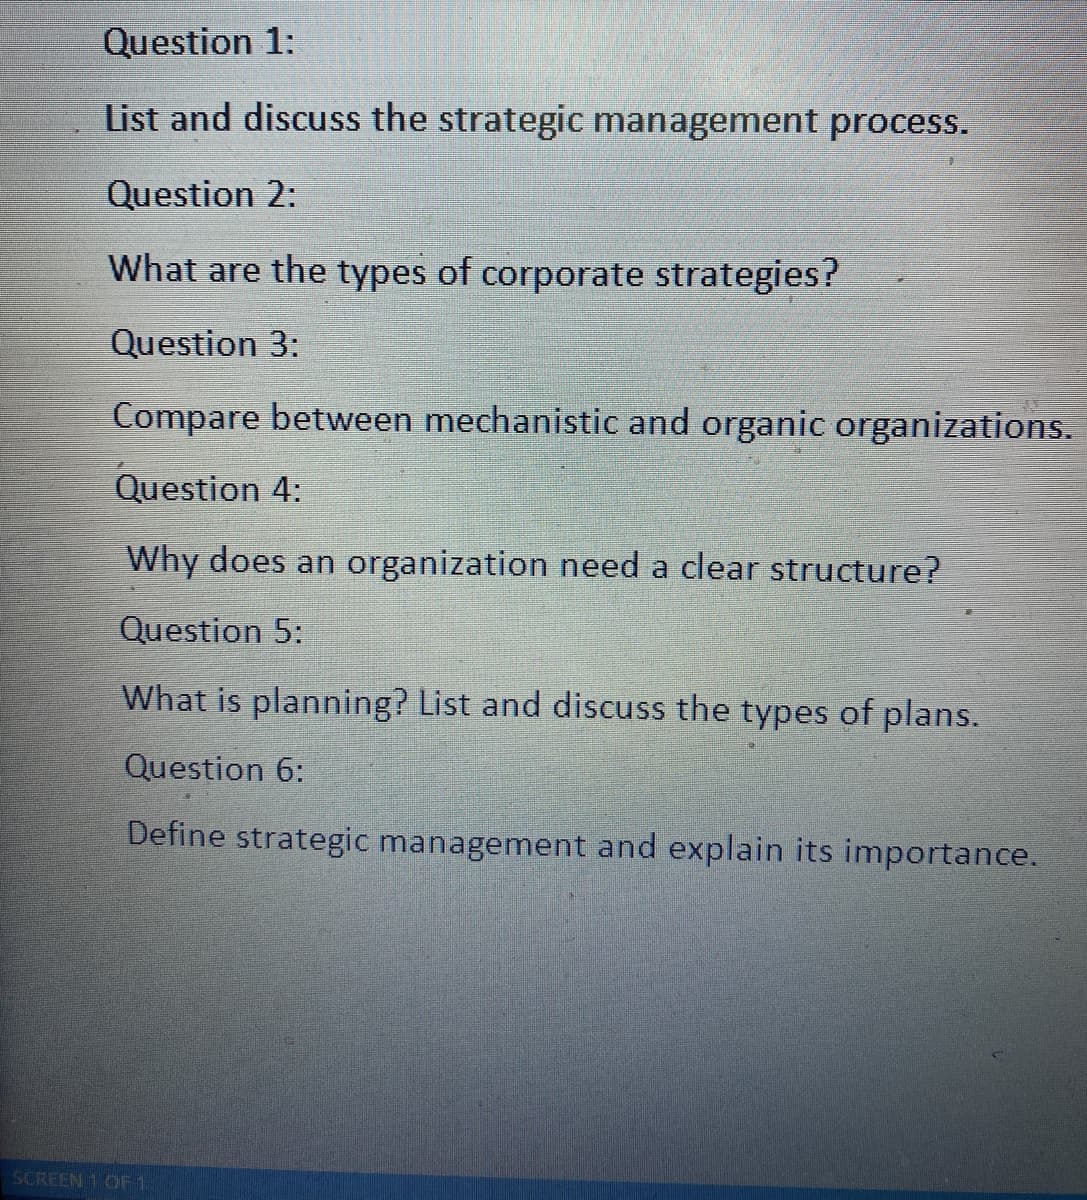 Question 1:
List and discuss the strategic management process.
Question 2:
What are the types of corporate strategies?
Question 3:
Compare between mechanistic and organic organizations.
Question 4:
Why does an organization need a clear structure?
Question 5:
What is planning? List and discuss the types of plans.
Question 6:
Define strategic management and explain its importance.
SCREEN 1 OF 1
